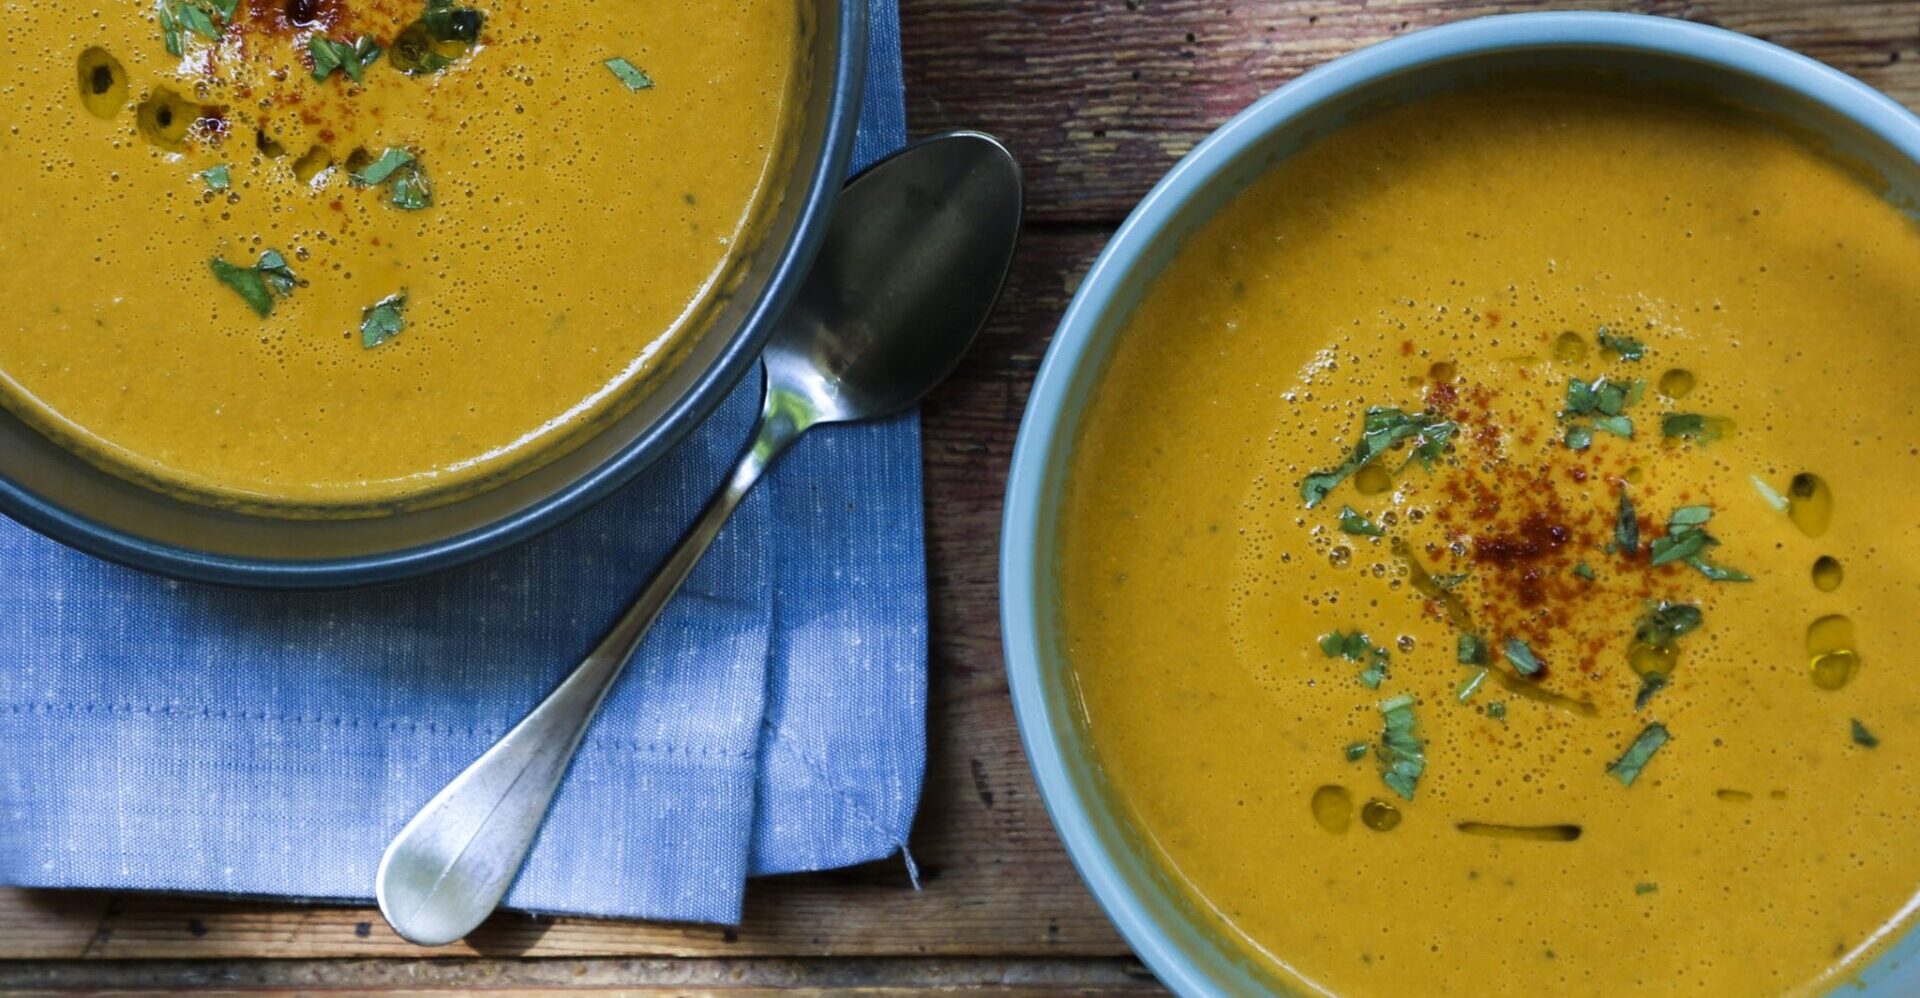 Atlanta's Miller Union Chef Satterfield's Table of butternut squash southern soup